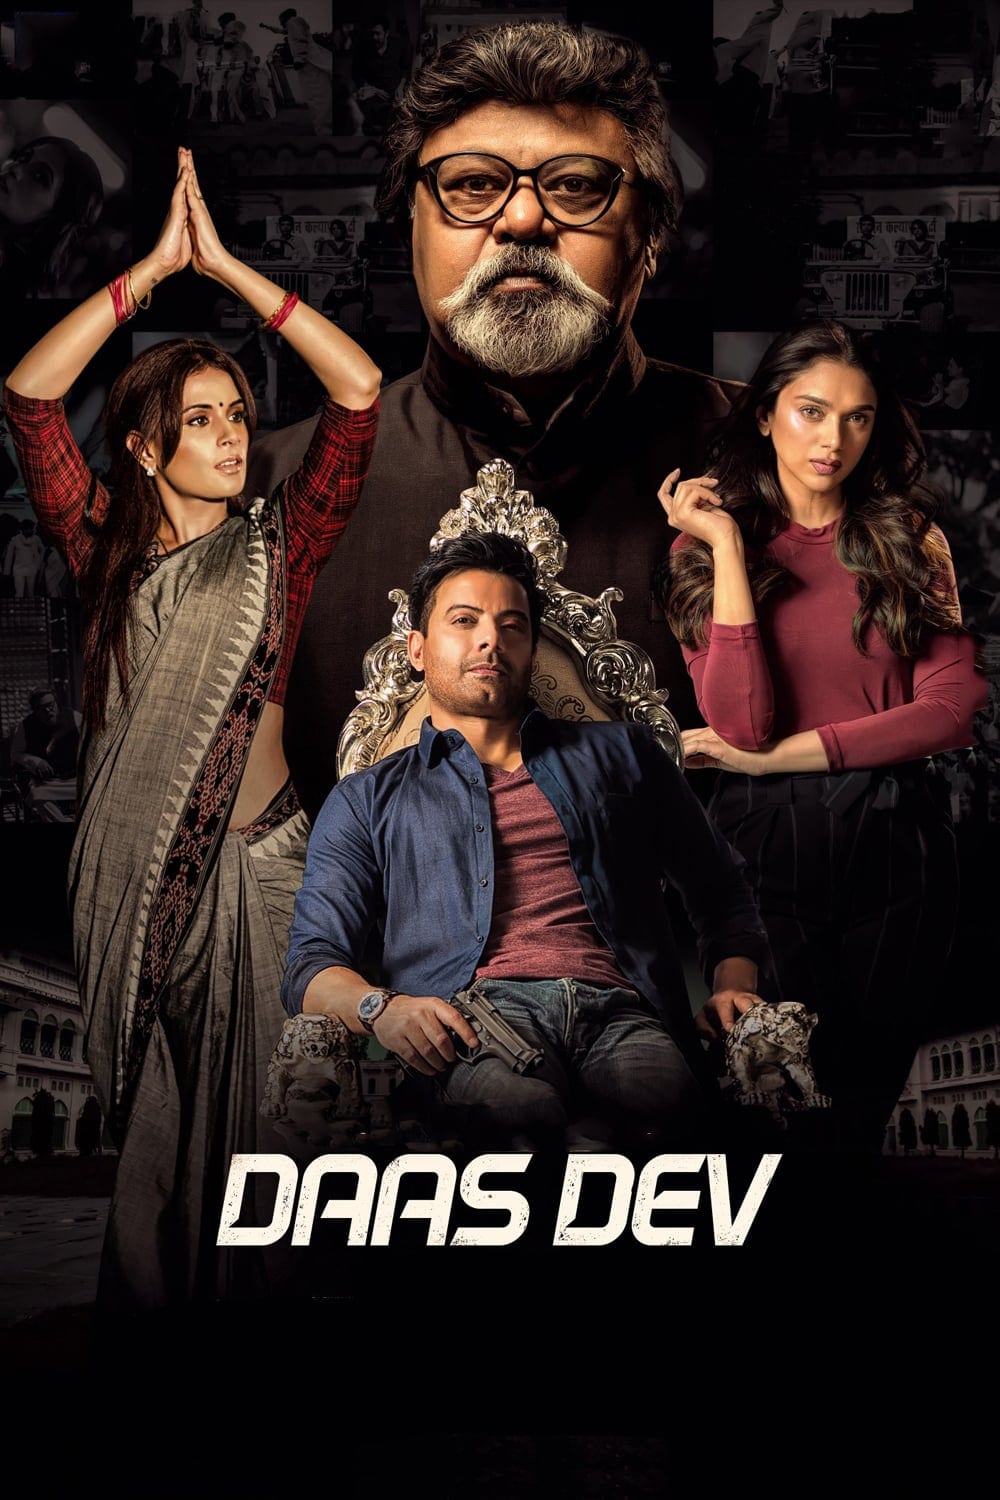 Poster for the movie "Daas Dev"